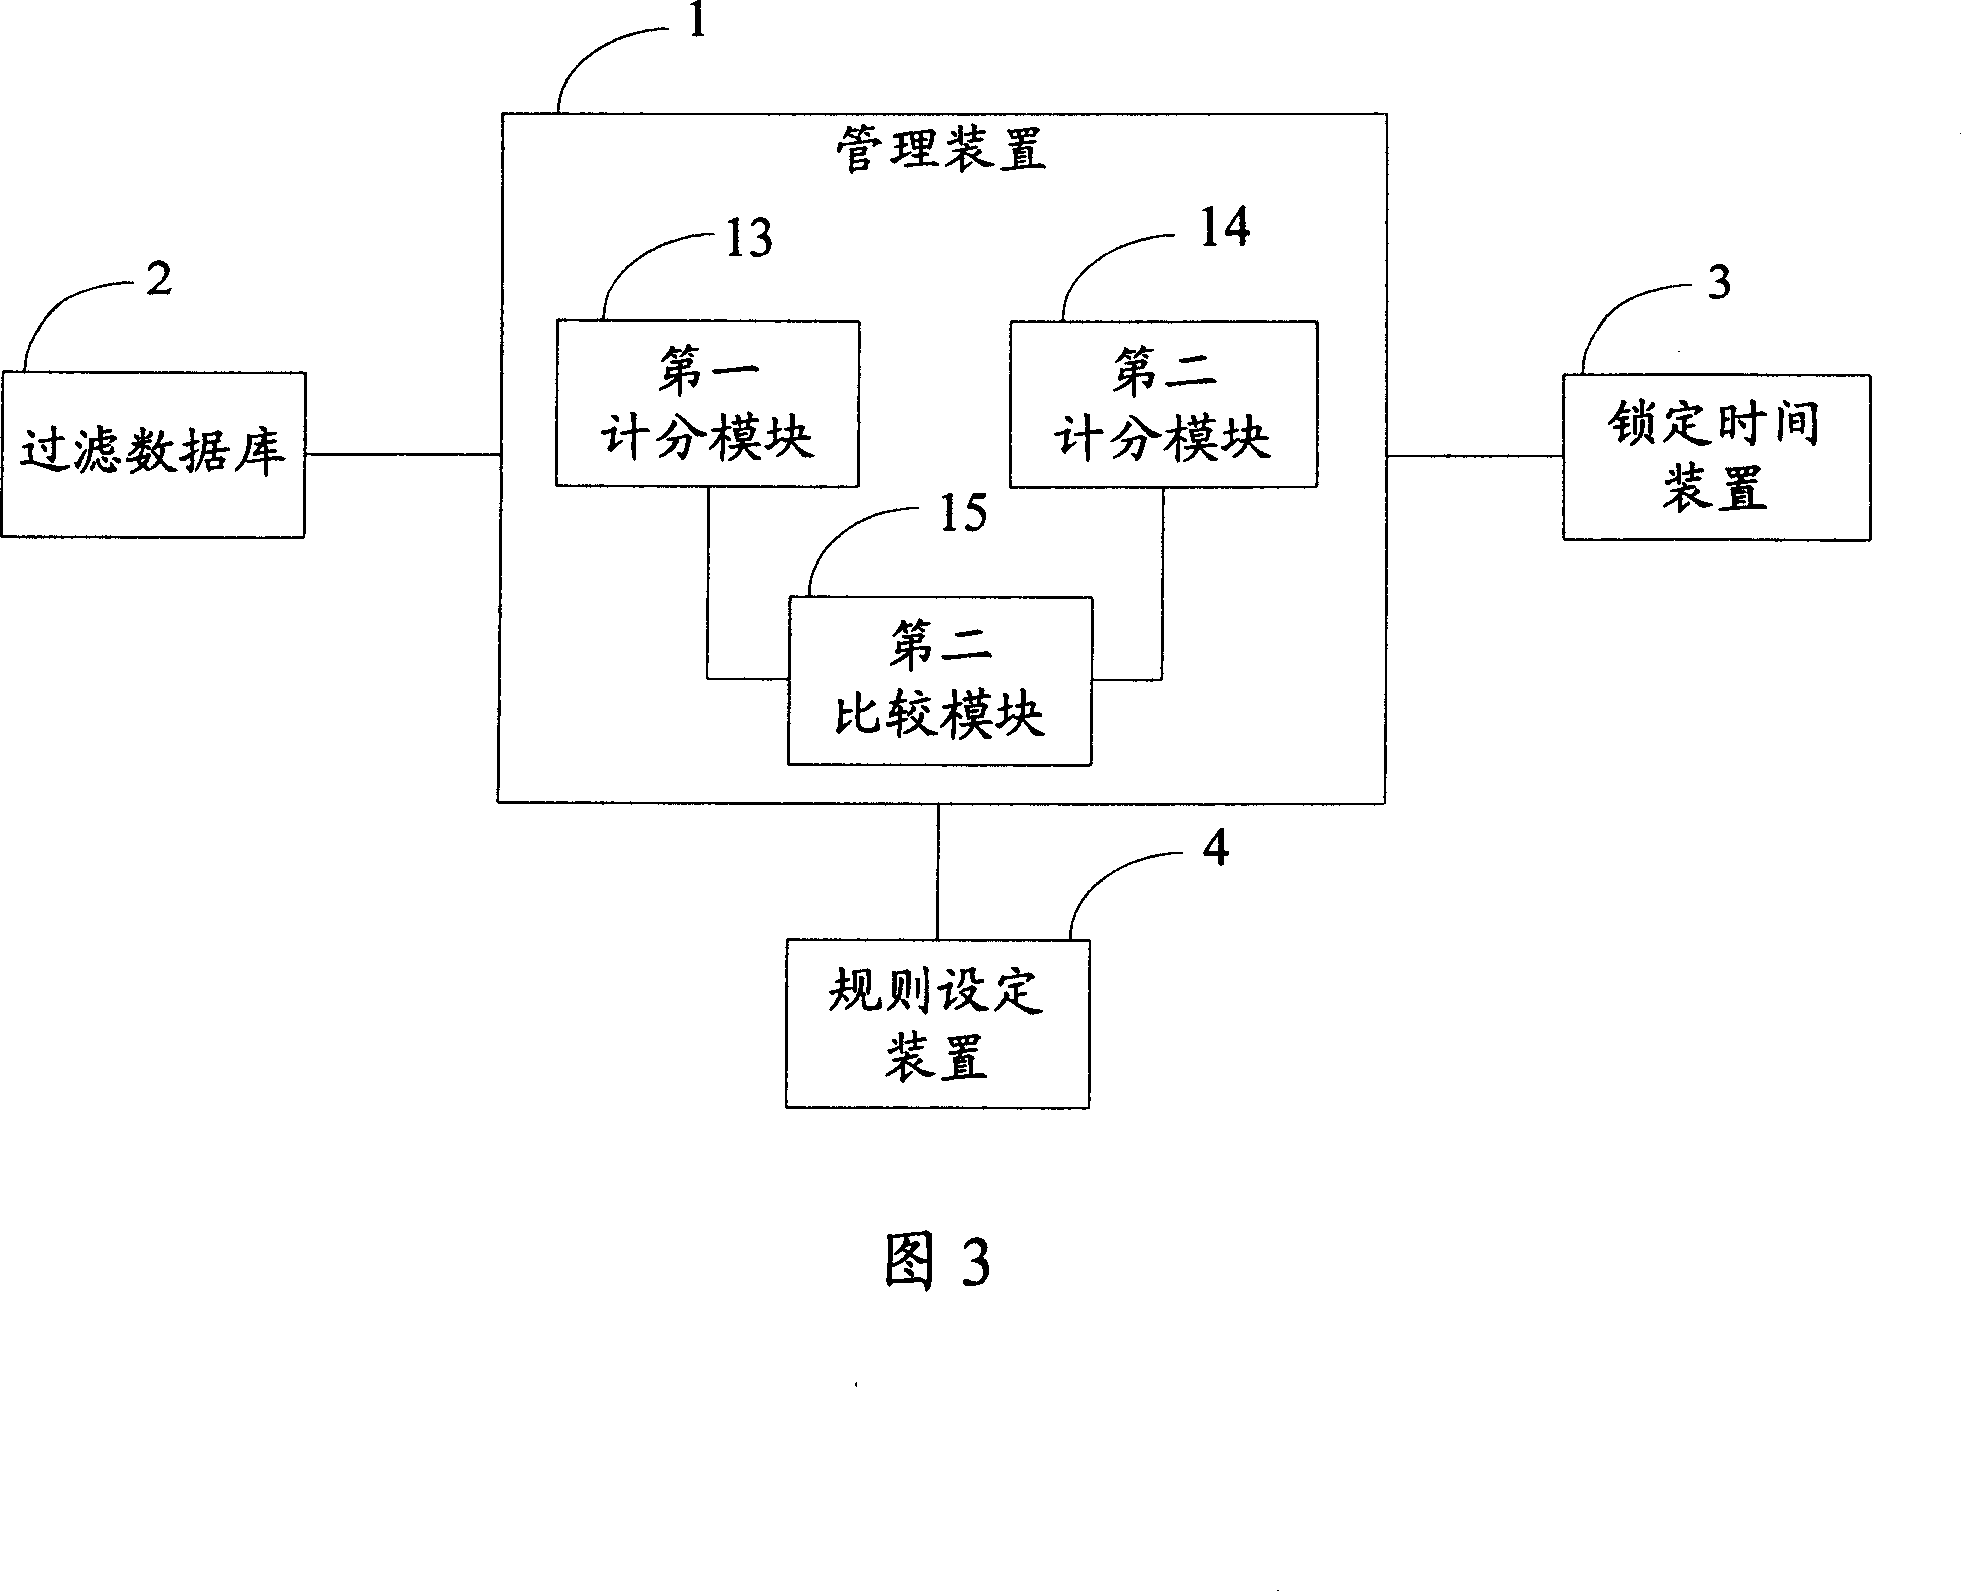 Method and system for managing and filtering black list